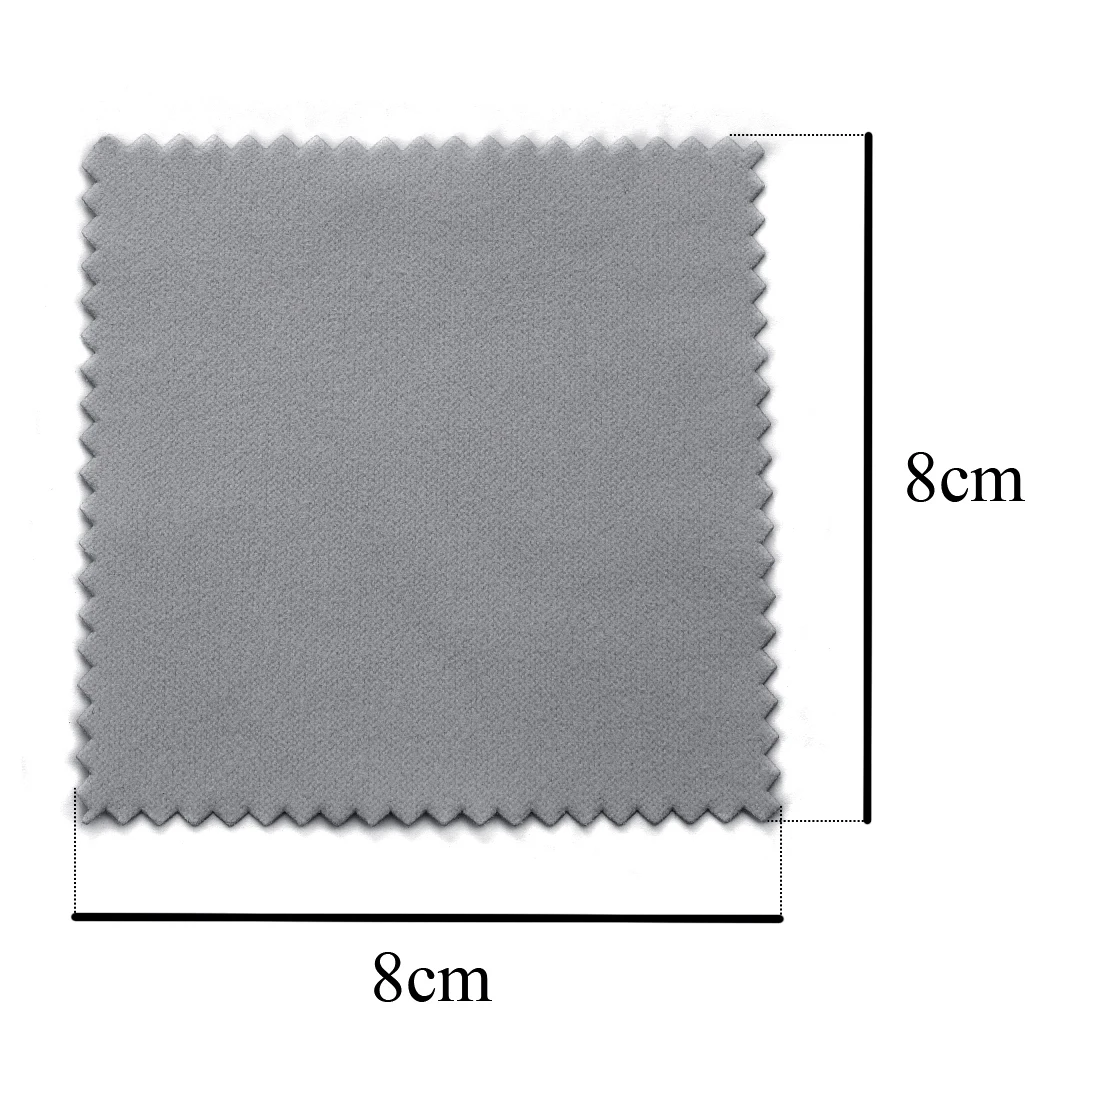 ELITechGroup Silver Cleaning Cloth, ChloroChek, Quantity: Each of 1